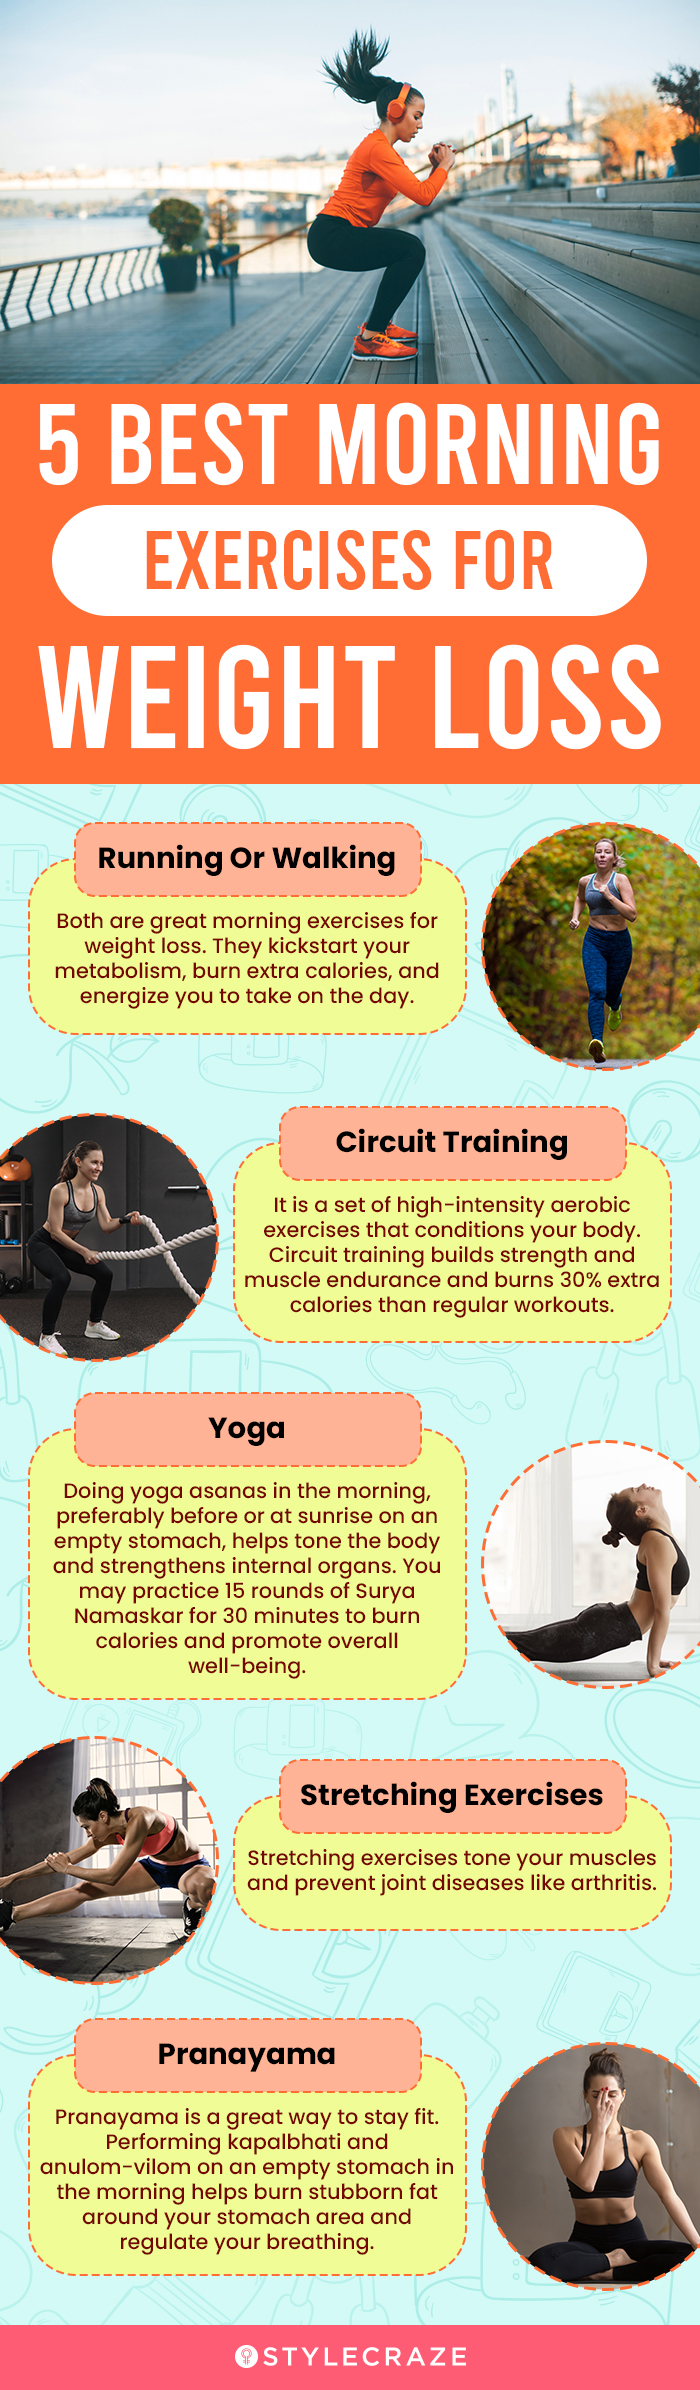 5 best morning exercises for weight loss (infographic)